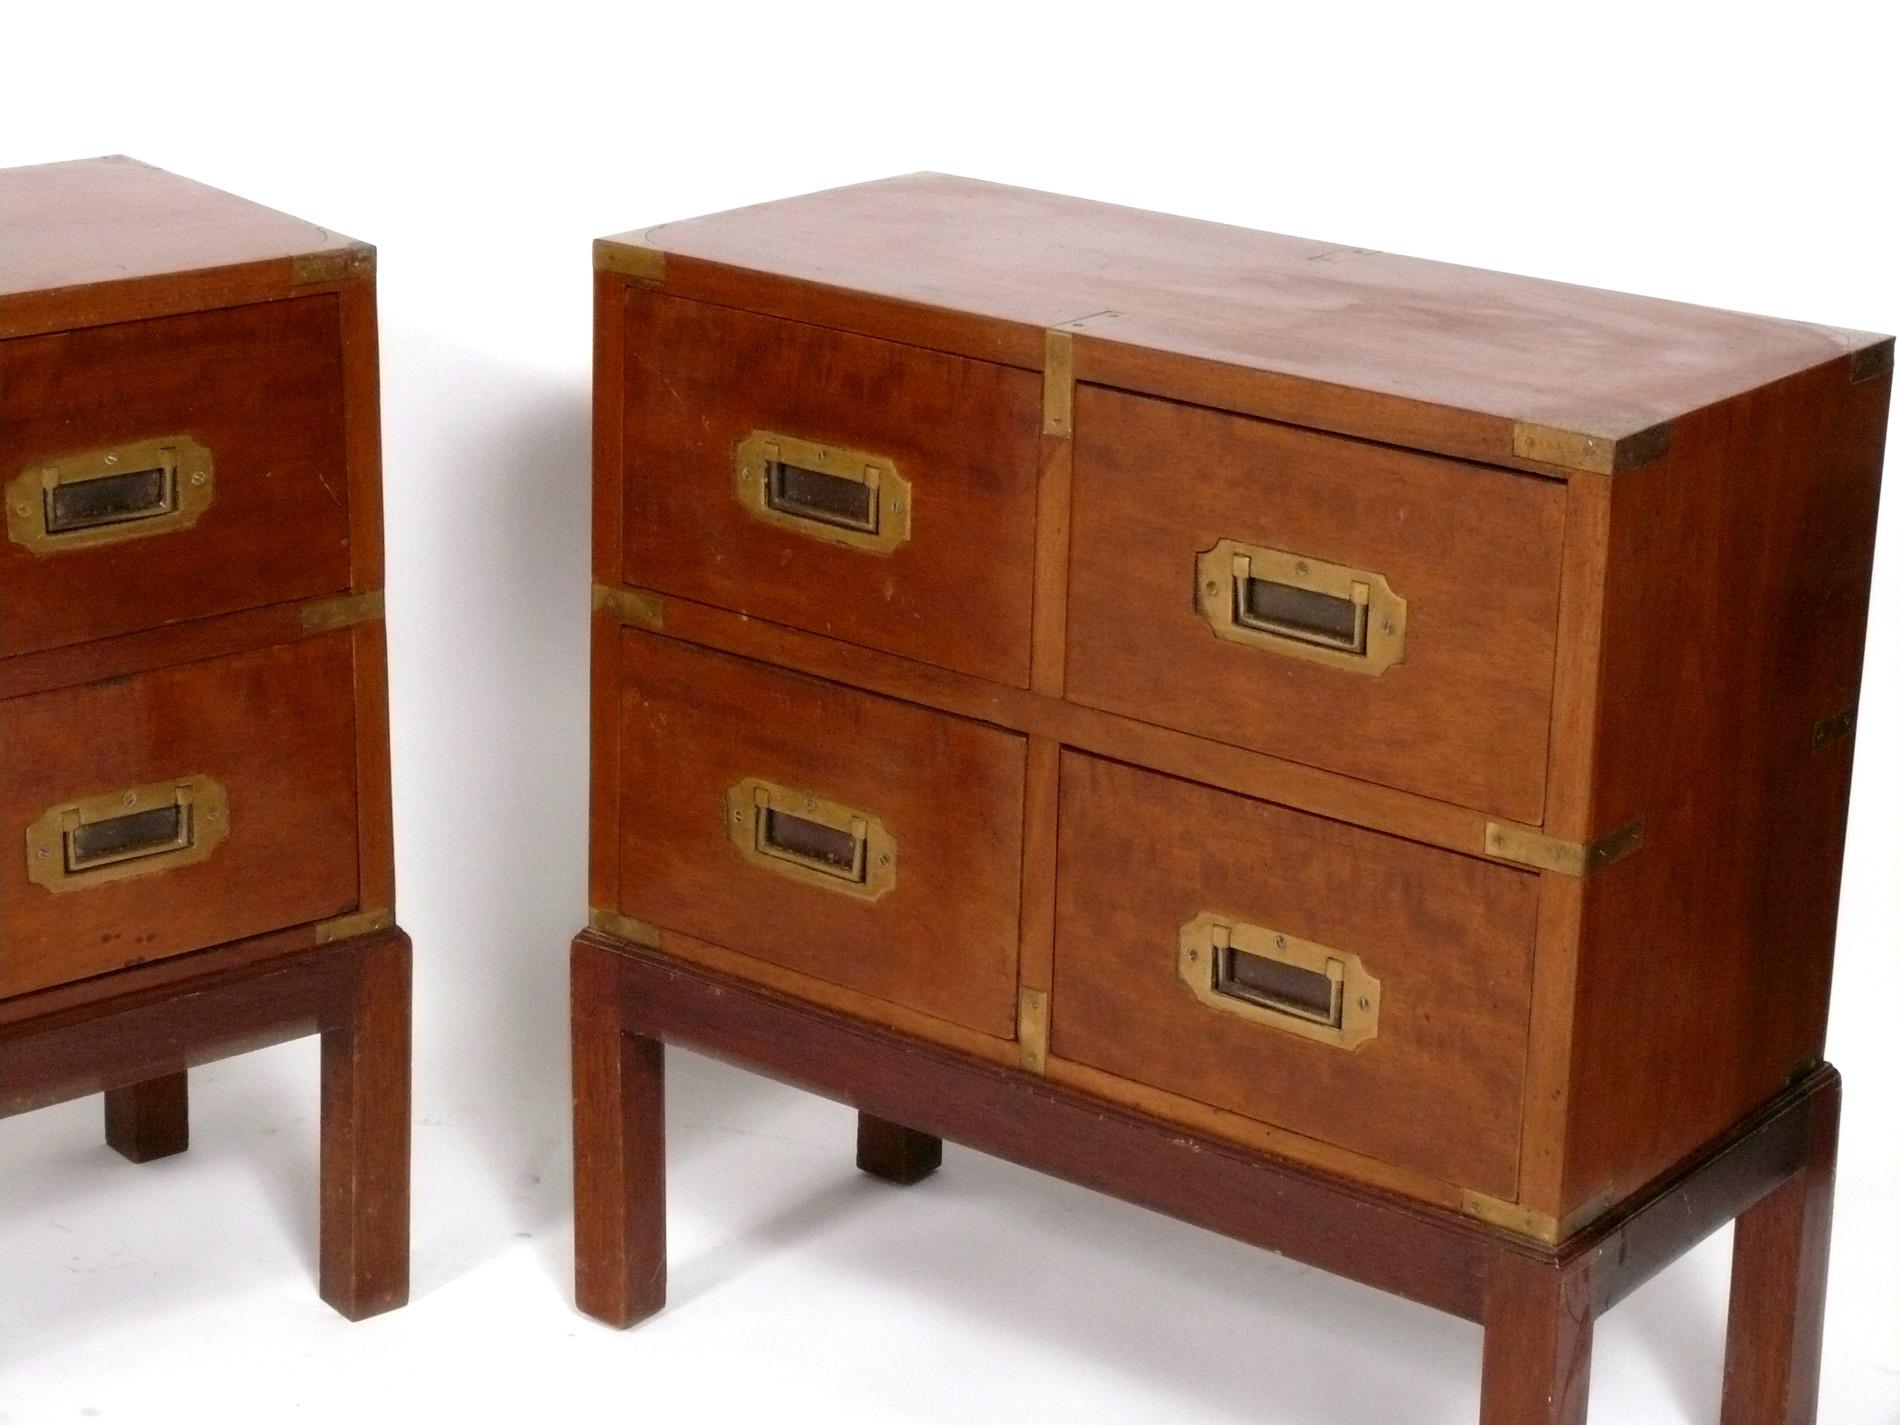 Metal Pair of Campaign End Tables - probably 19th Century English